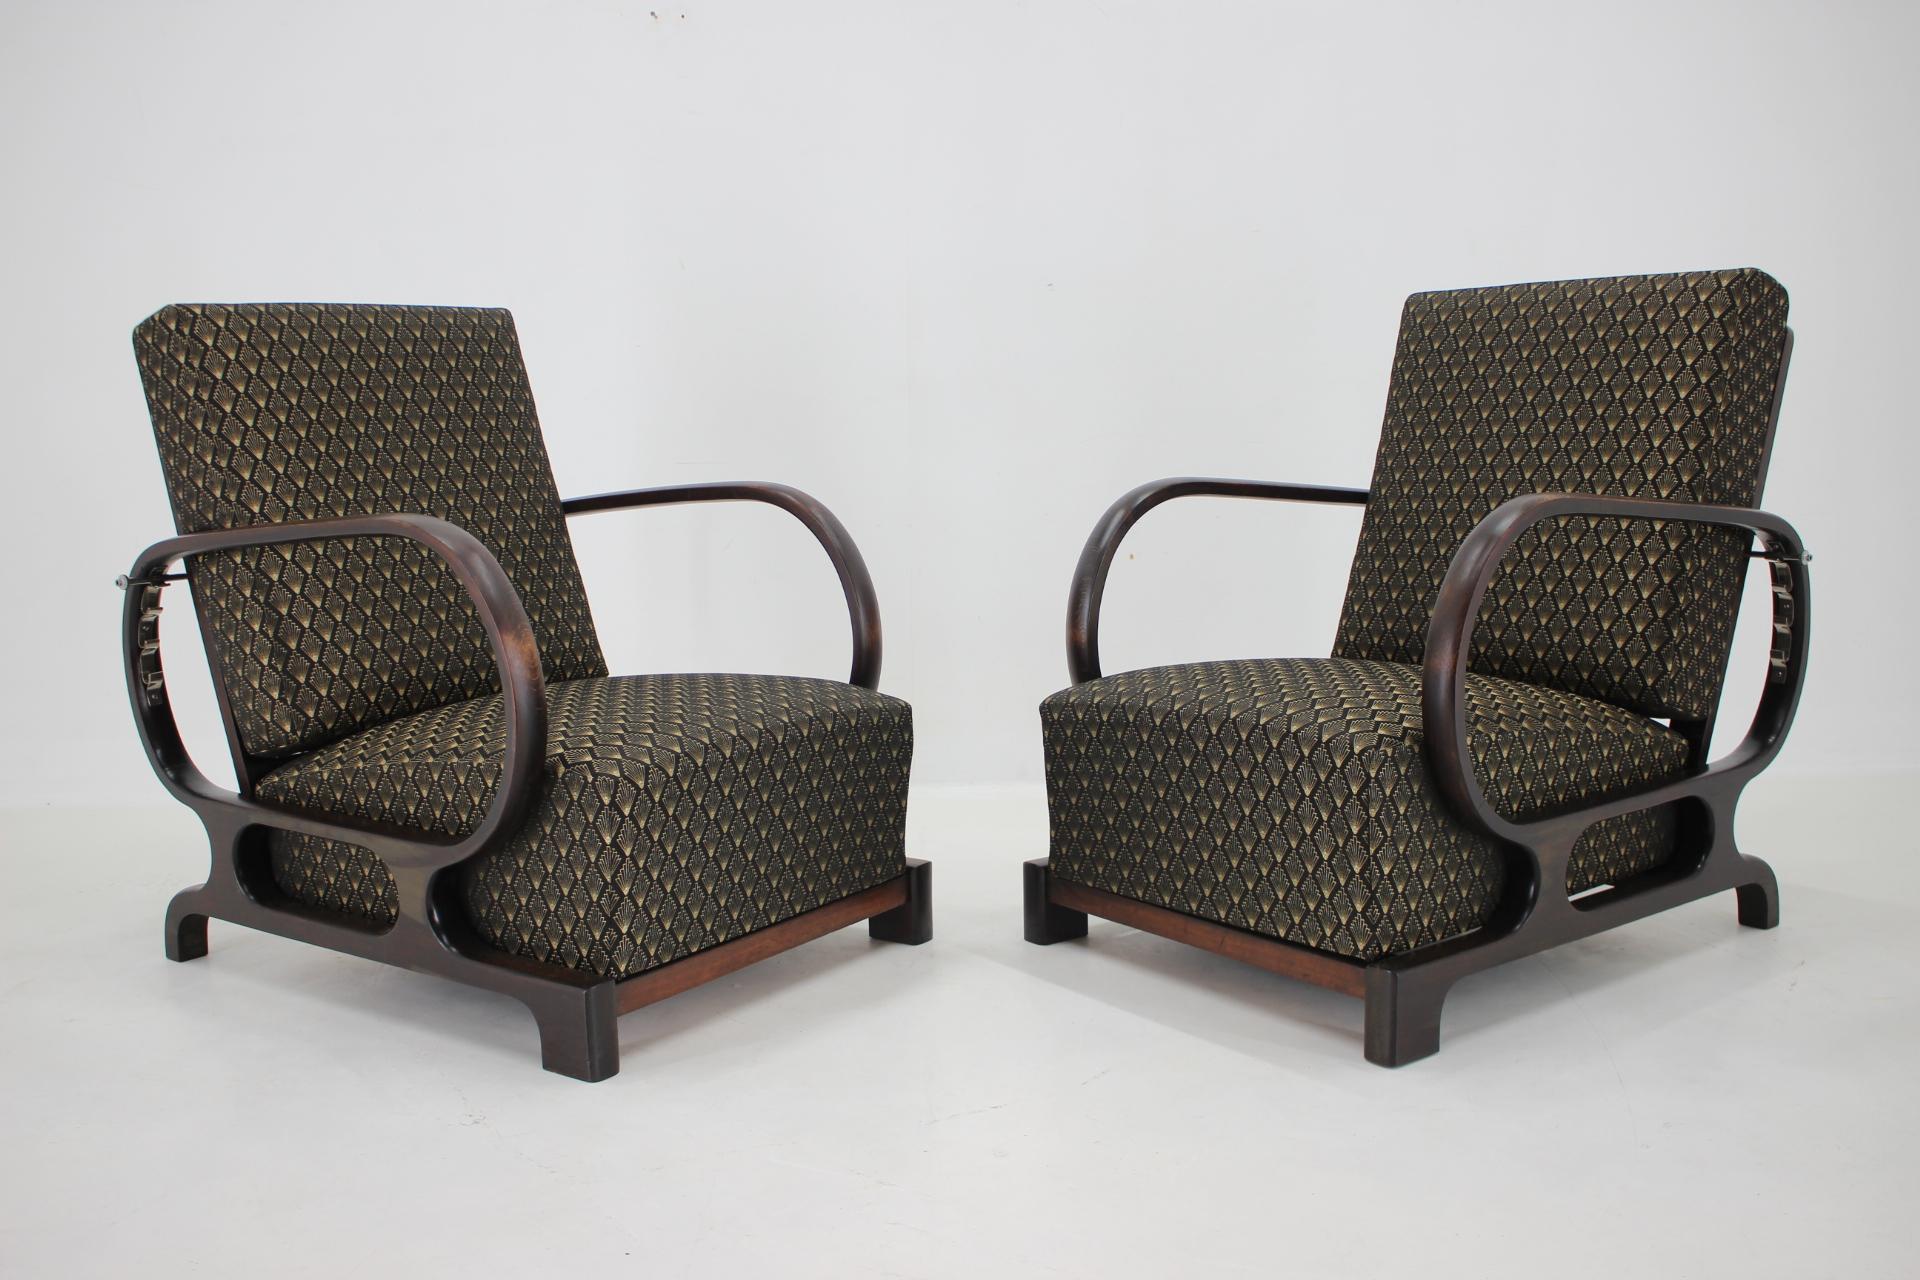 1930s Pair of Rare Restored Art Deco Adjustable Armchairs, Czechoslovakia In Good Condition For Sale In Praha, CZ